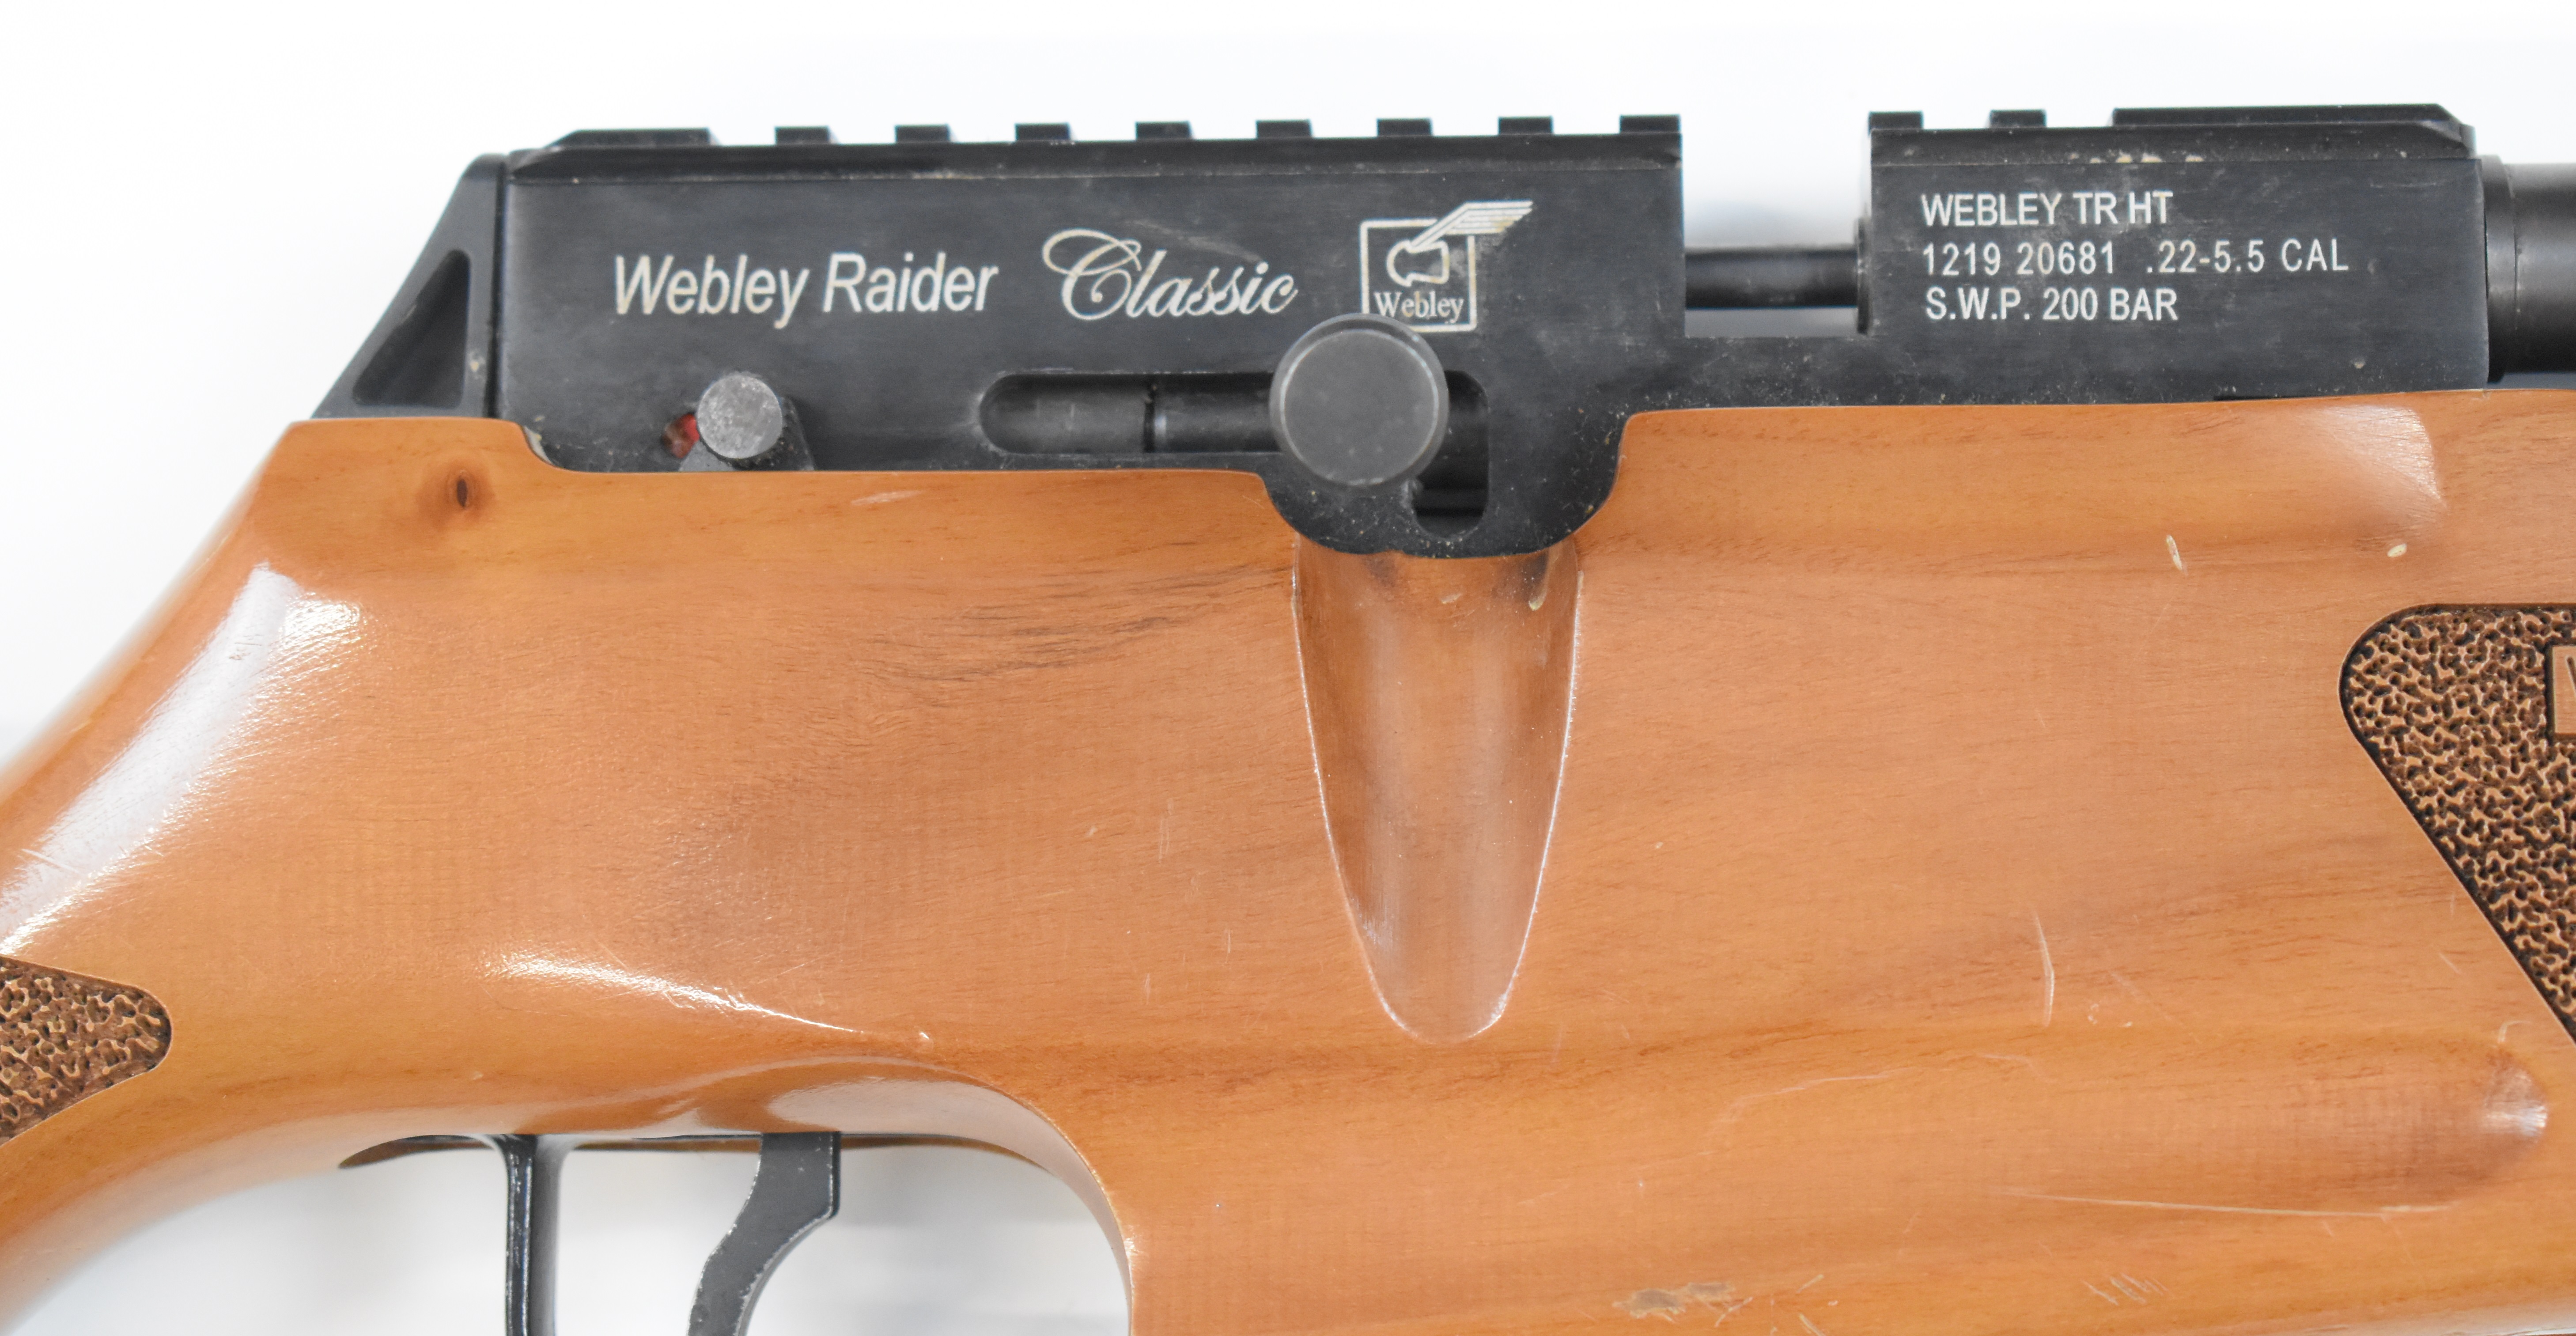 Webley Raider Classic .22 PCP air rifle with textured semi-pistol grip and forend, raised cheek - Image 6 of 10